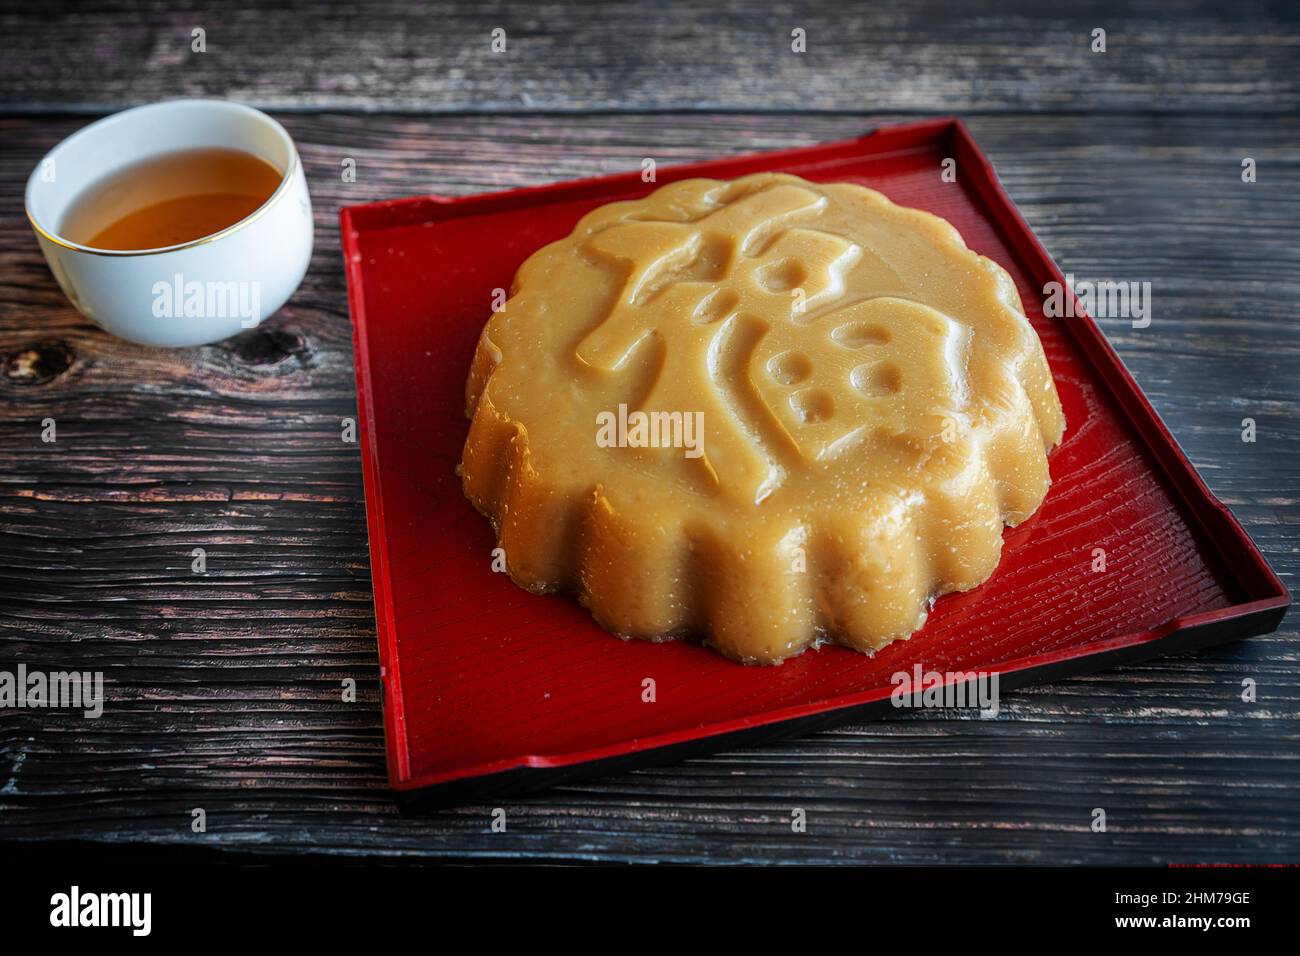 Traditional Chinese New Year sweet rice cake dessert known as Nian Gao, which is made from steamed glutinous rice flour batter. Rice cake with Chinese Stock Photo